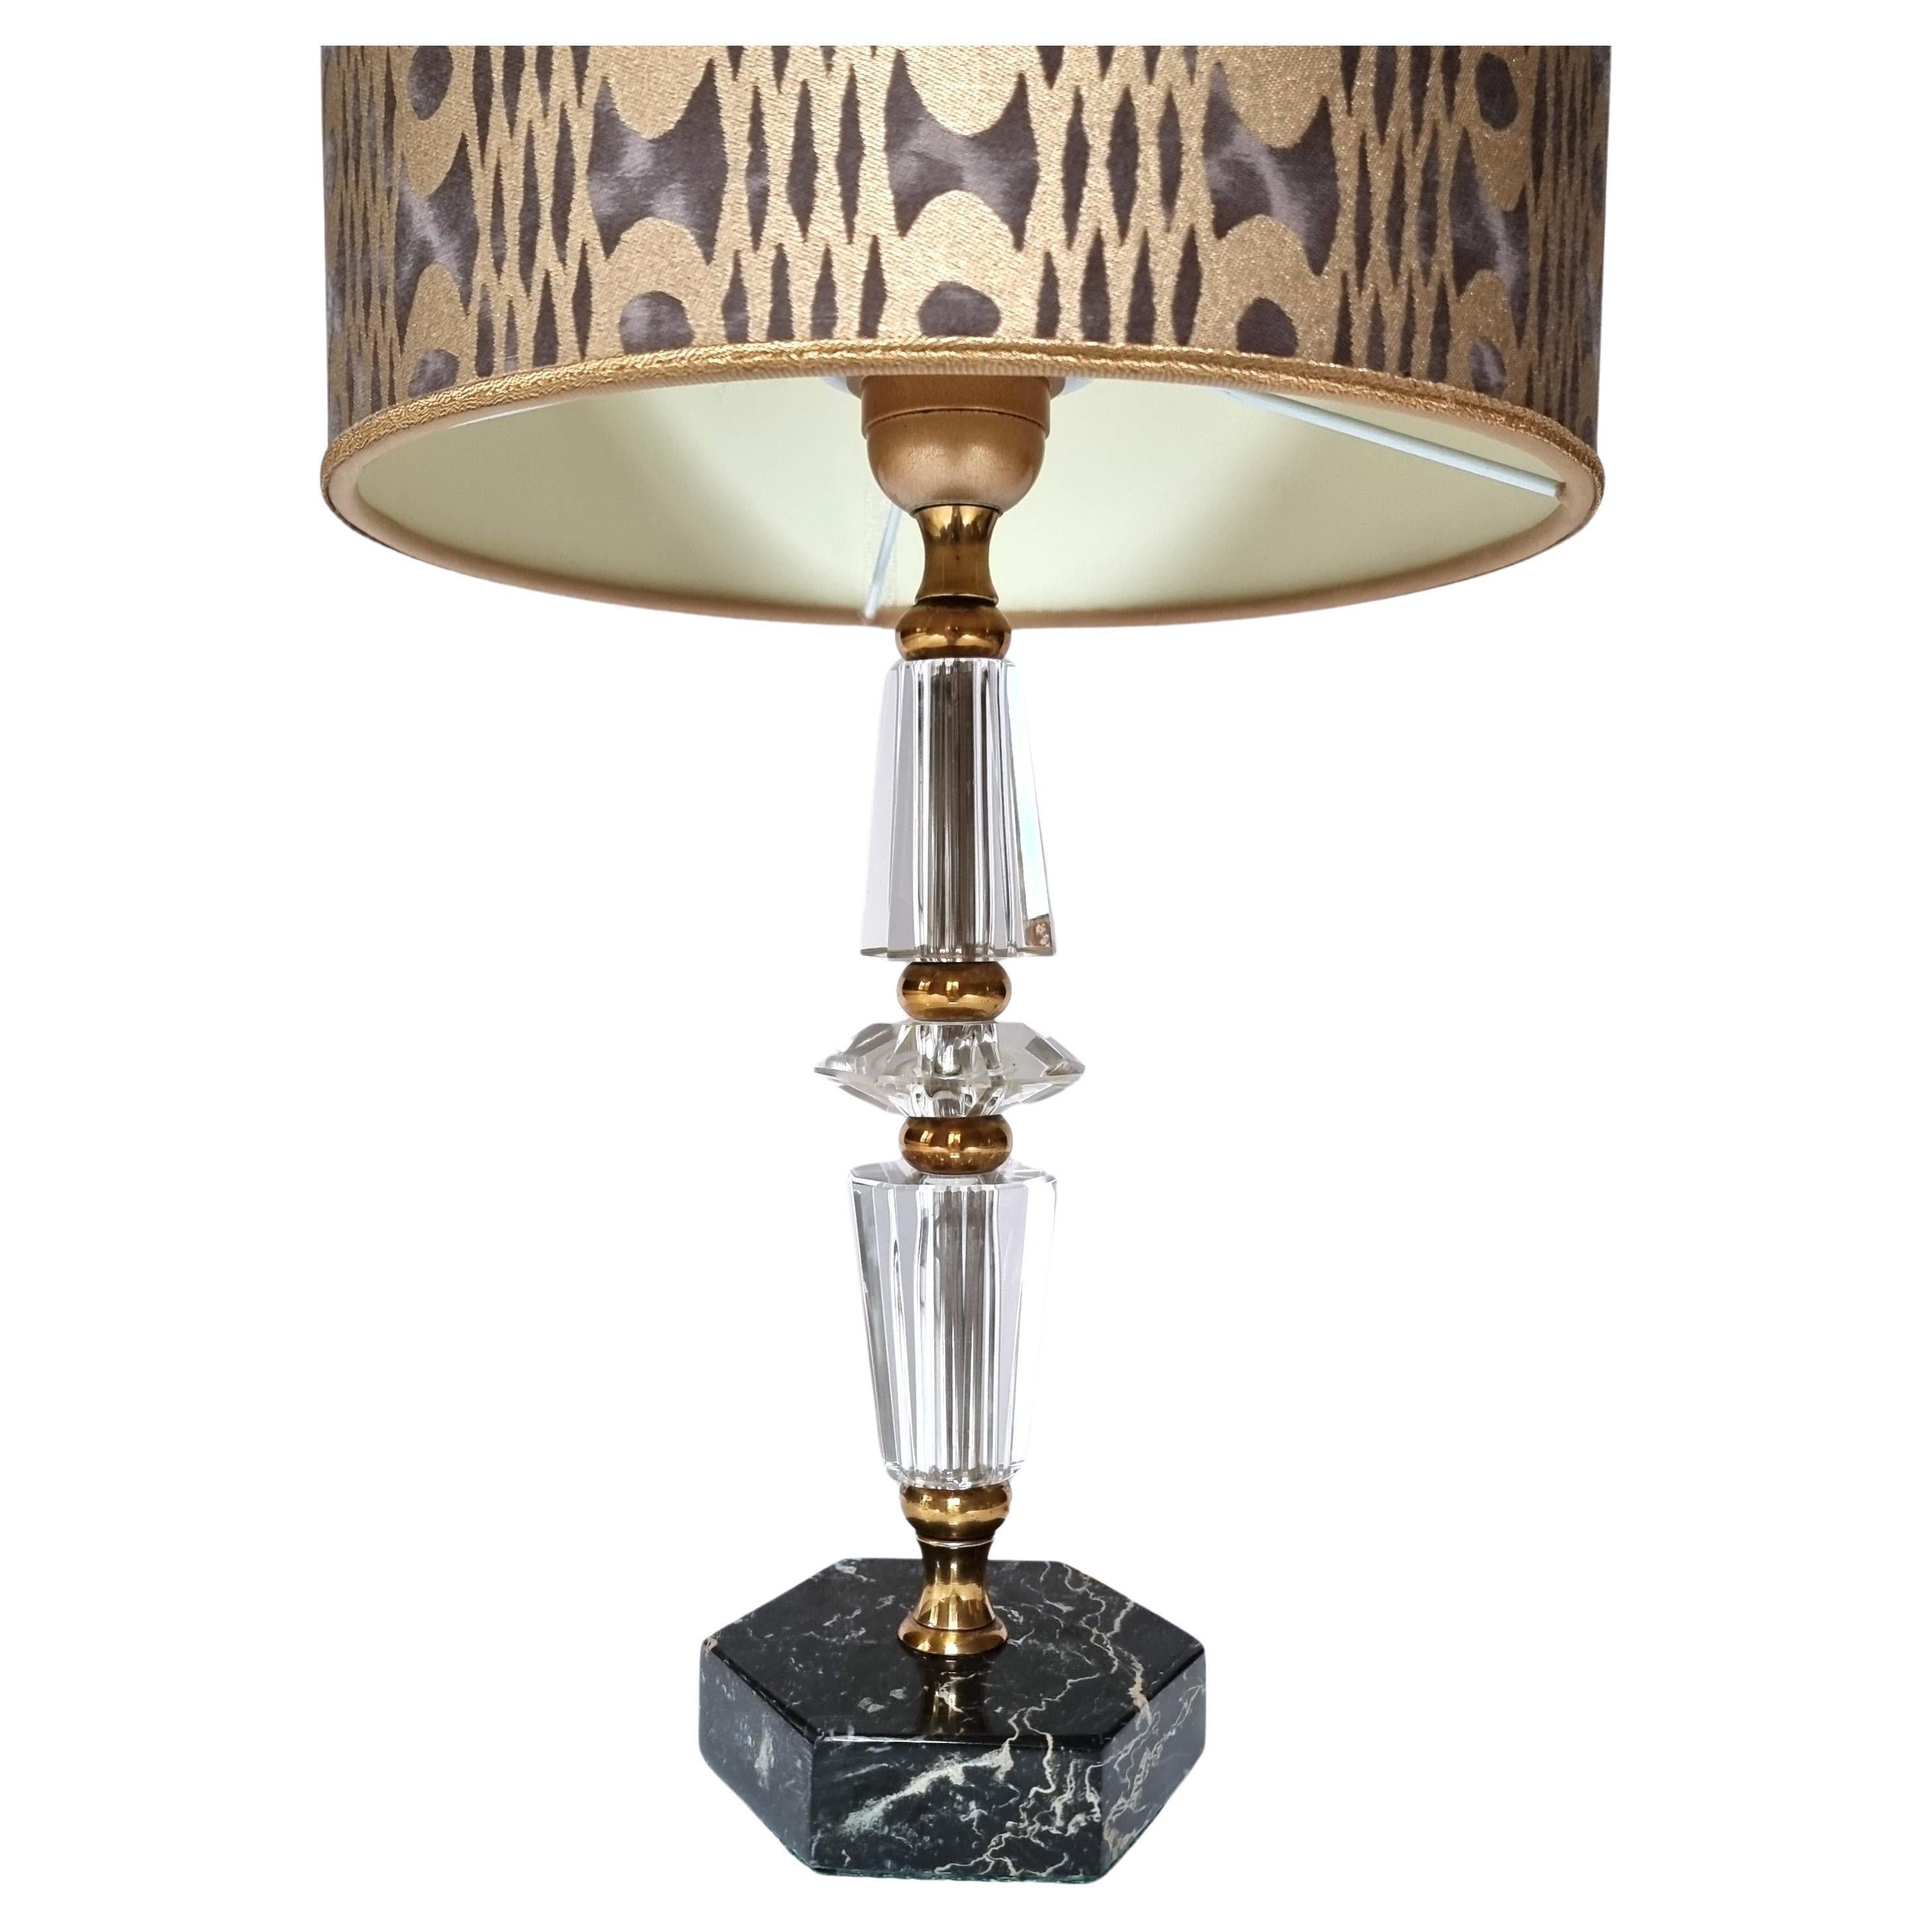 This is an amazing Italian faceted cut glass table lamp on hexagonal black marble base, mid-20th century. Newly wired and in perfect working condition.
The drum lampshade is new handmade using Fortuny fabric - Unita pattern - in smoke and gold